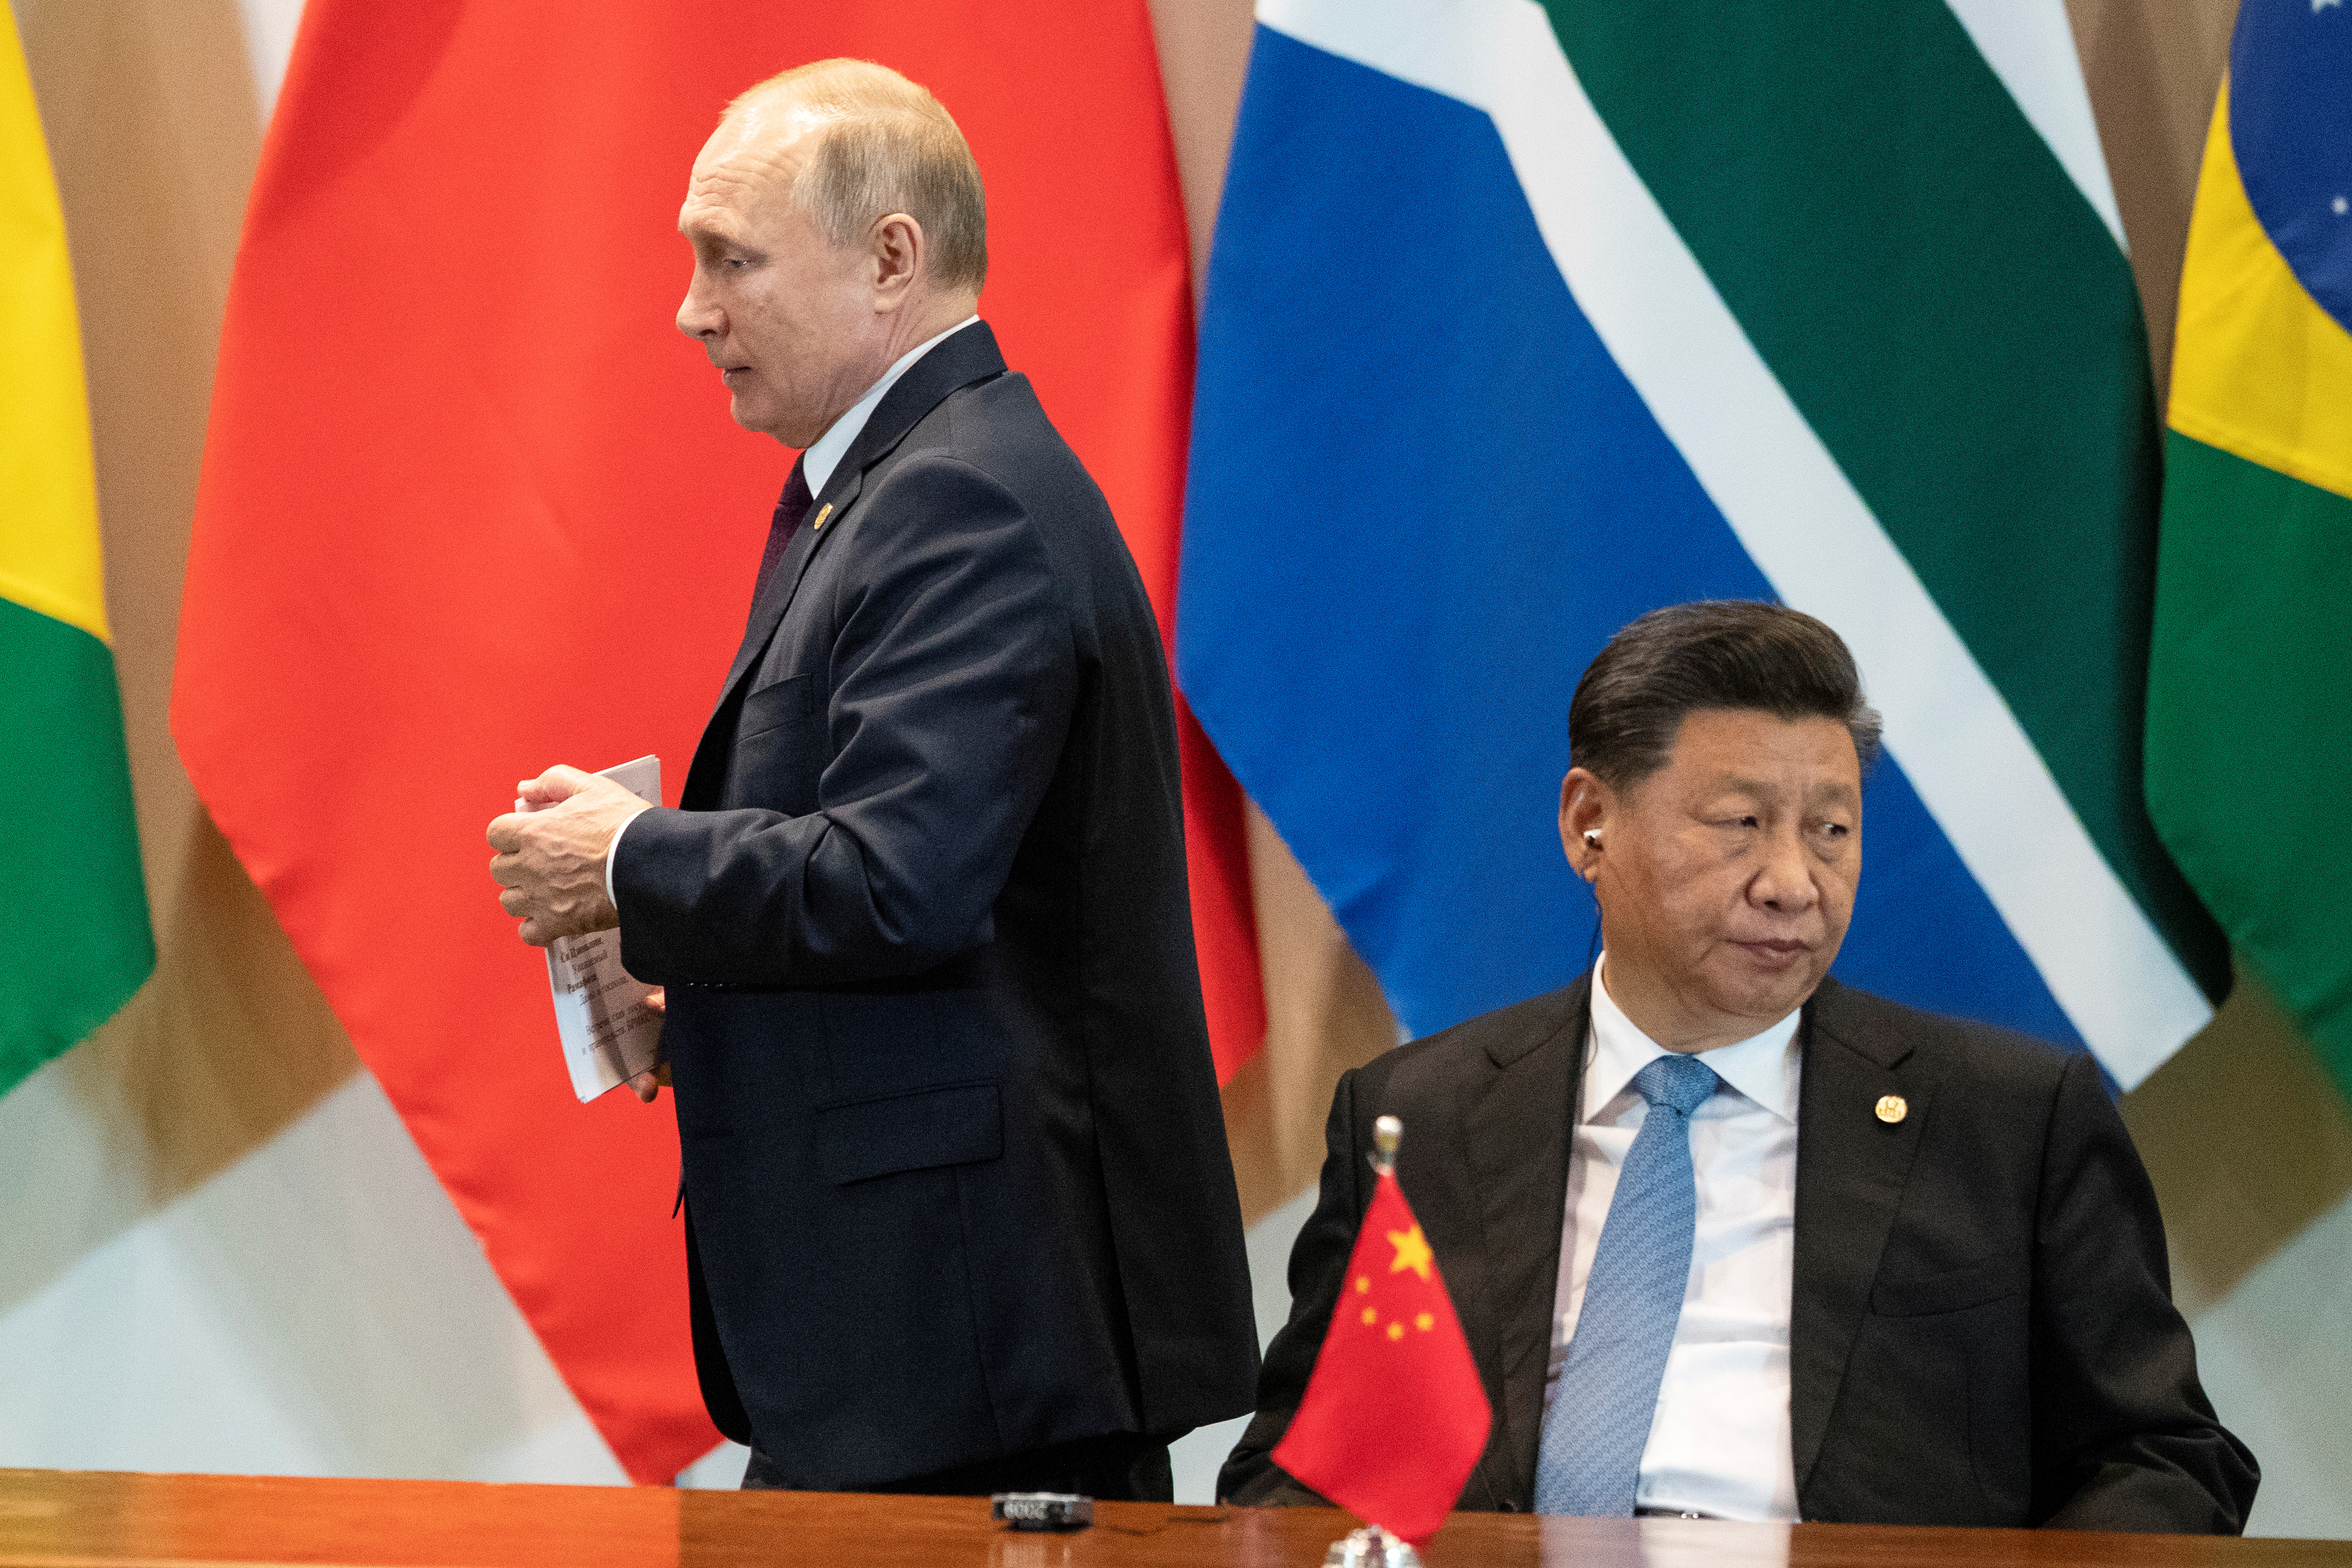 China's President Xi Jinping and Russia's President Vladimir Putin attend a meeting with members of the Business Council and management of the New Development Bank during the BRICS emerging economies at the Itamaraty palace in Brasilia